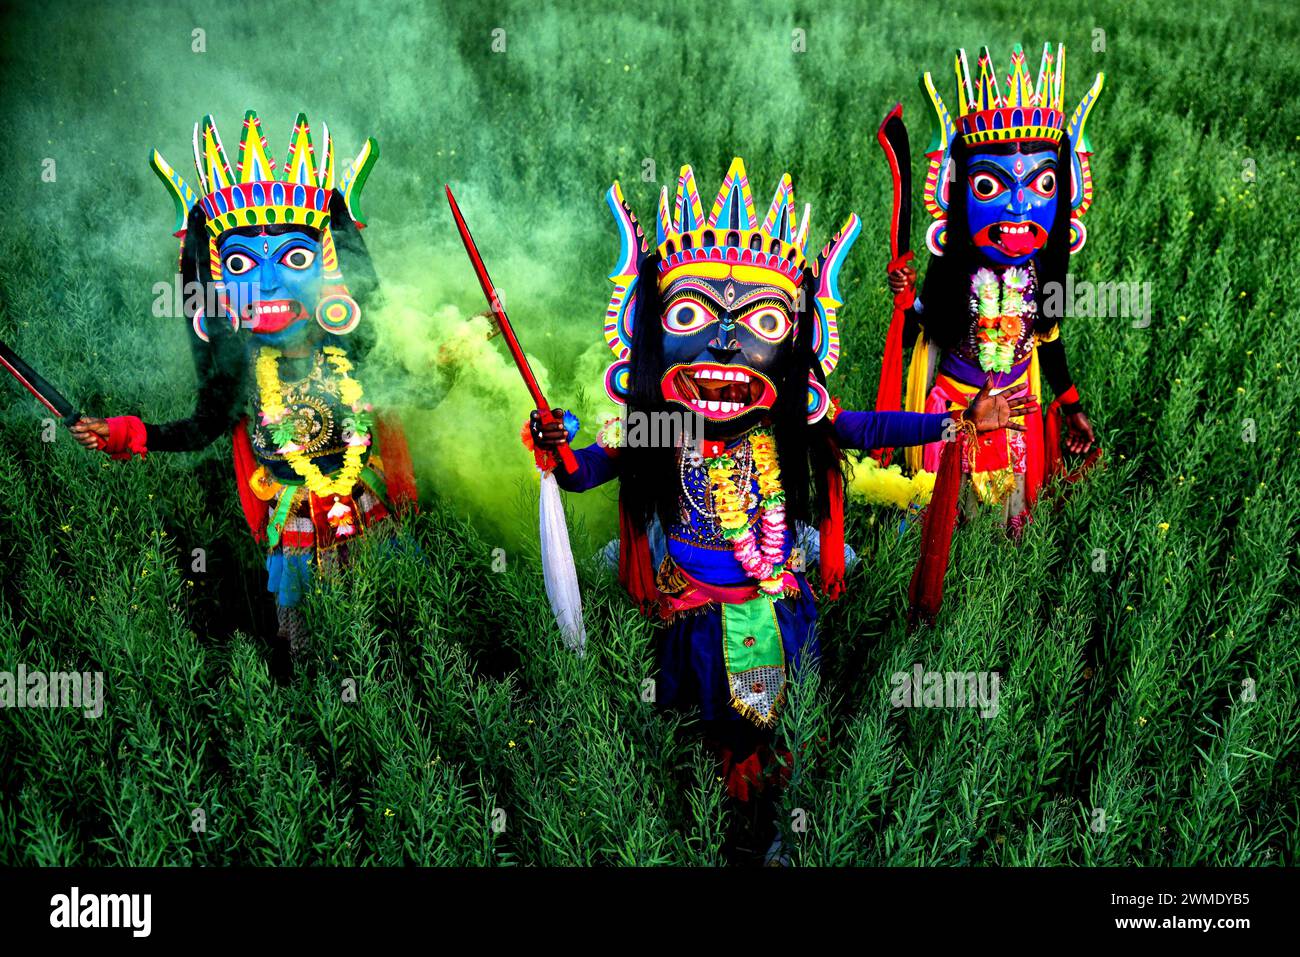 Masked dancers of Gomira dance troupe perform at a big rice field at a village near Raiganj. Gomira is a masked dance form. The word ‘Gomira' has been derived from the colloquial form of the word ‘Gram-Chandi' or the female deity who is the protective force of the village. The exact origin of the dance form is not traceable and the knowledge has been lost over time. Gomira dance is a rural dance form mainly practiced in the Dinajpur district of West Bengal. The Gomira dances are organized to appease the deity to usher in the 'good forces' and drive out the 'evil forces'. It is usually organise Stock Photo